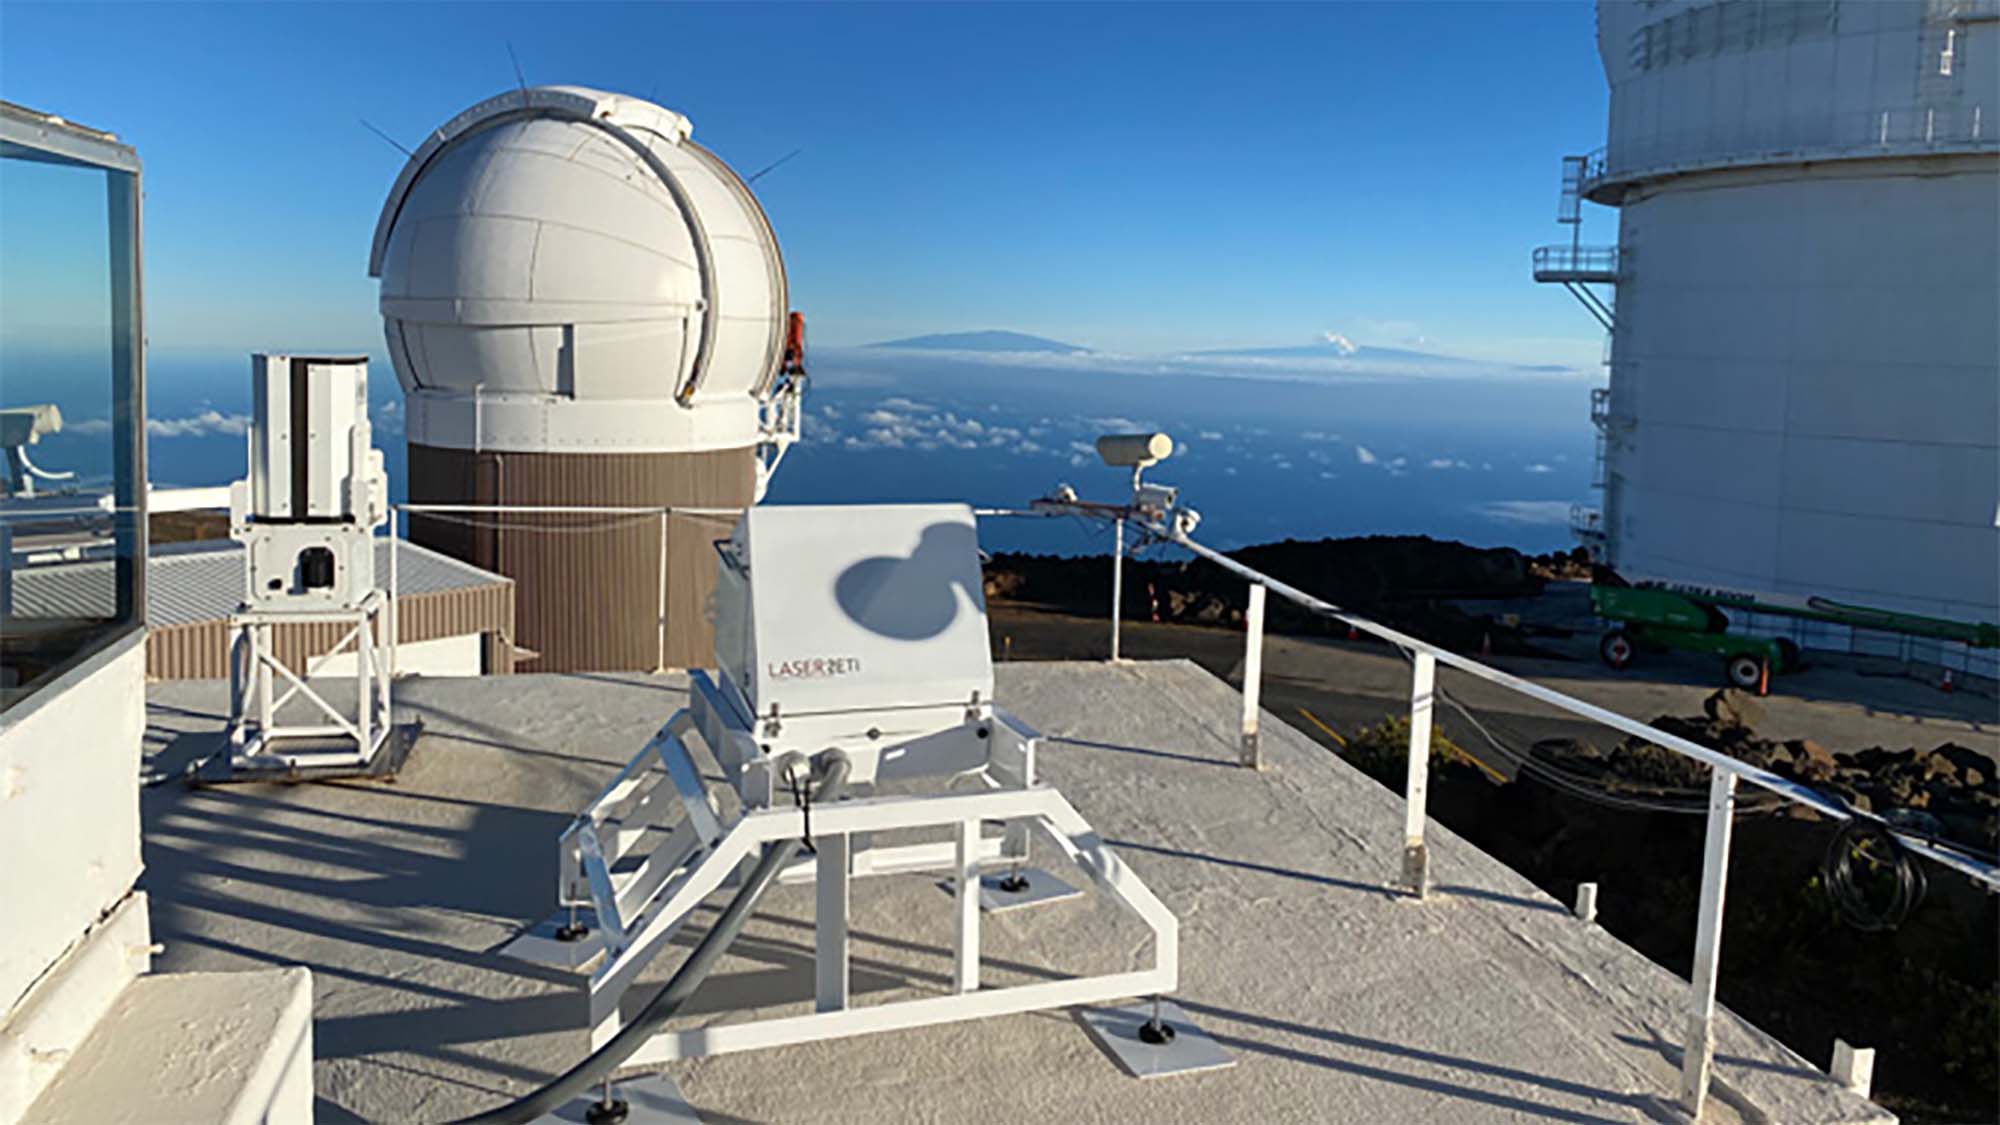 A LaserSETI optical sensor installed on the roof of an observatory on the summit of mount Haleakalā in Hawai'i